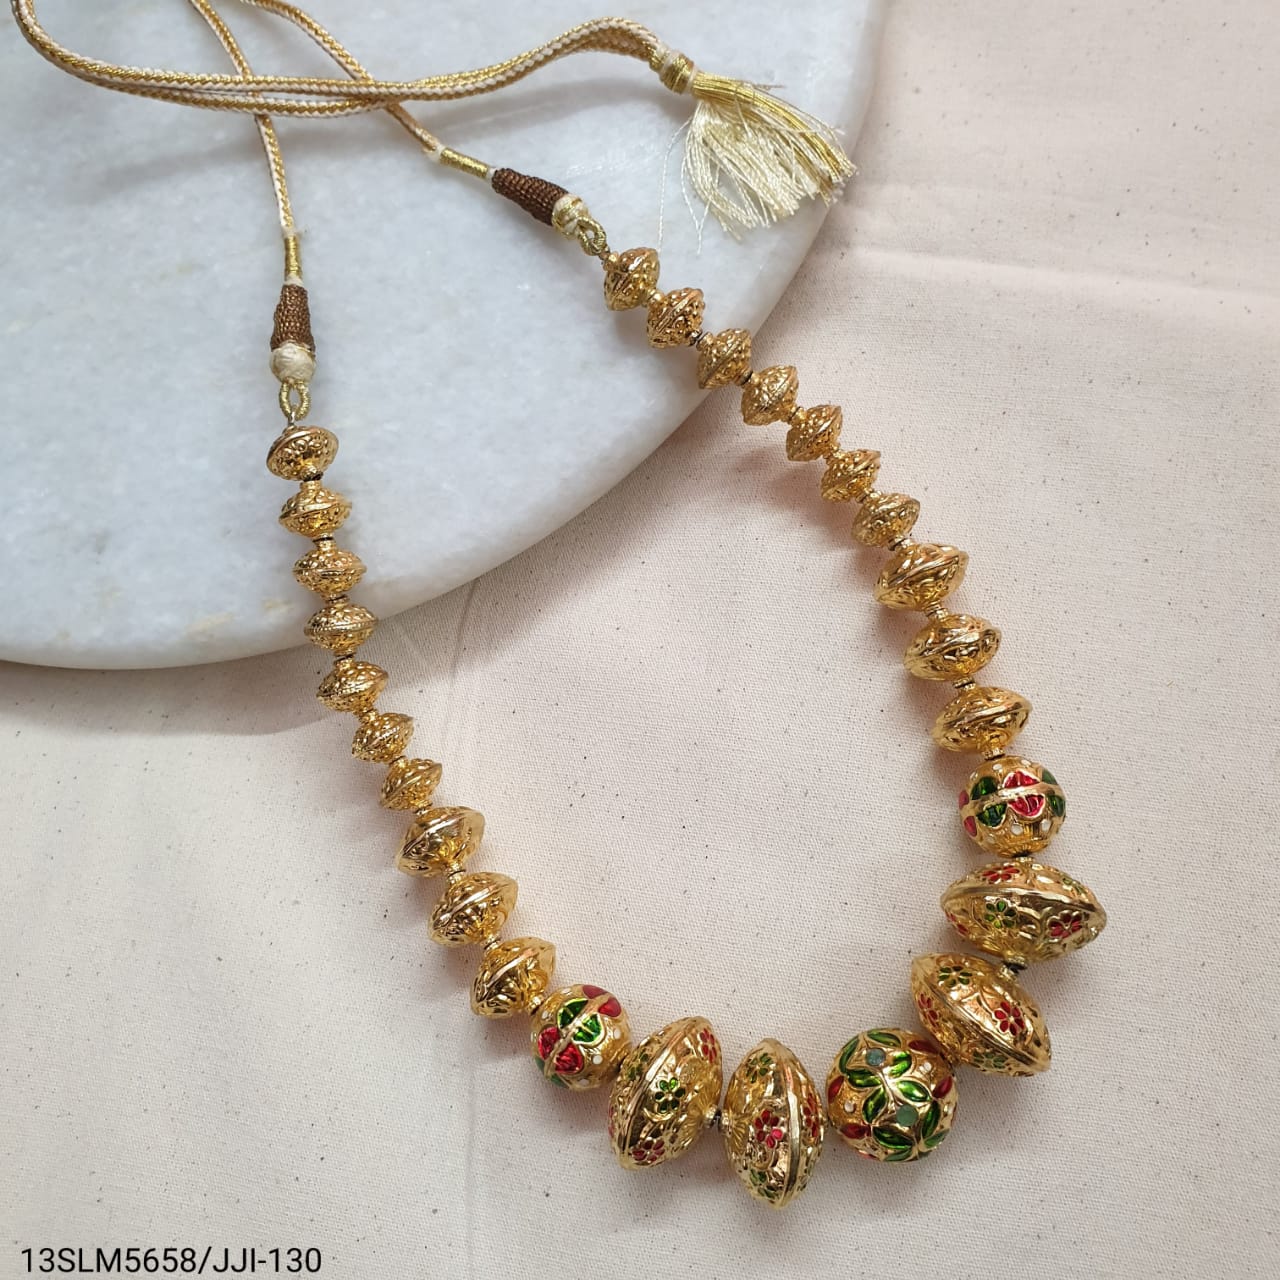 Gold Tone Handcarved Bead Necklace